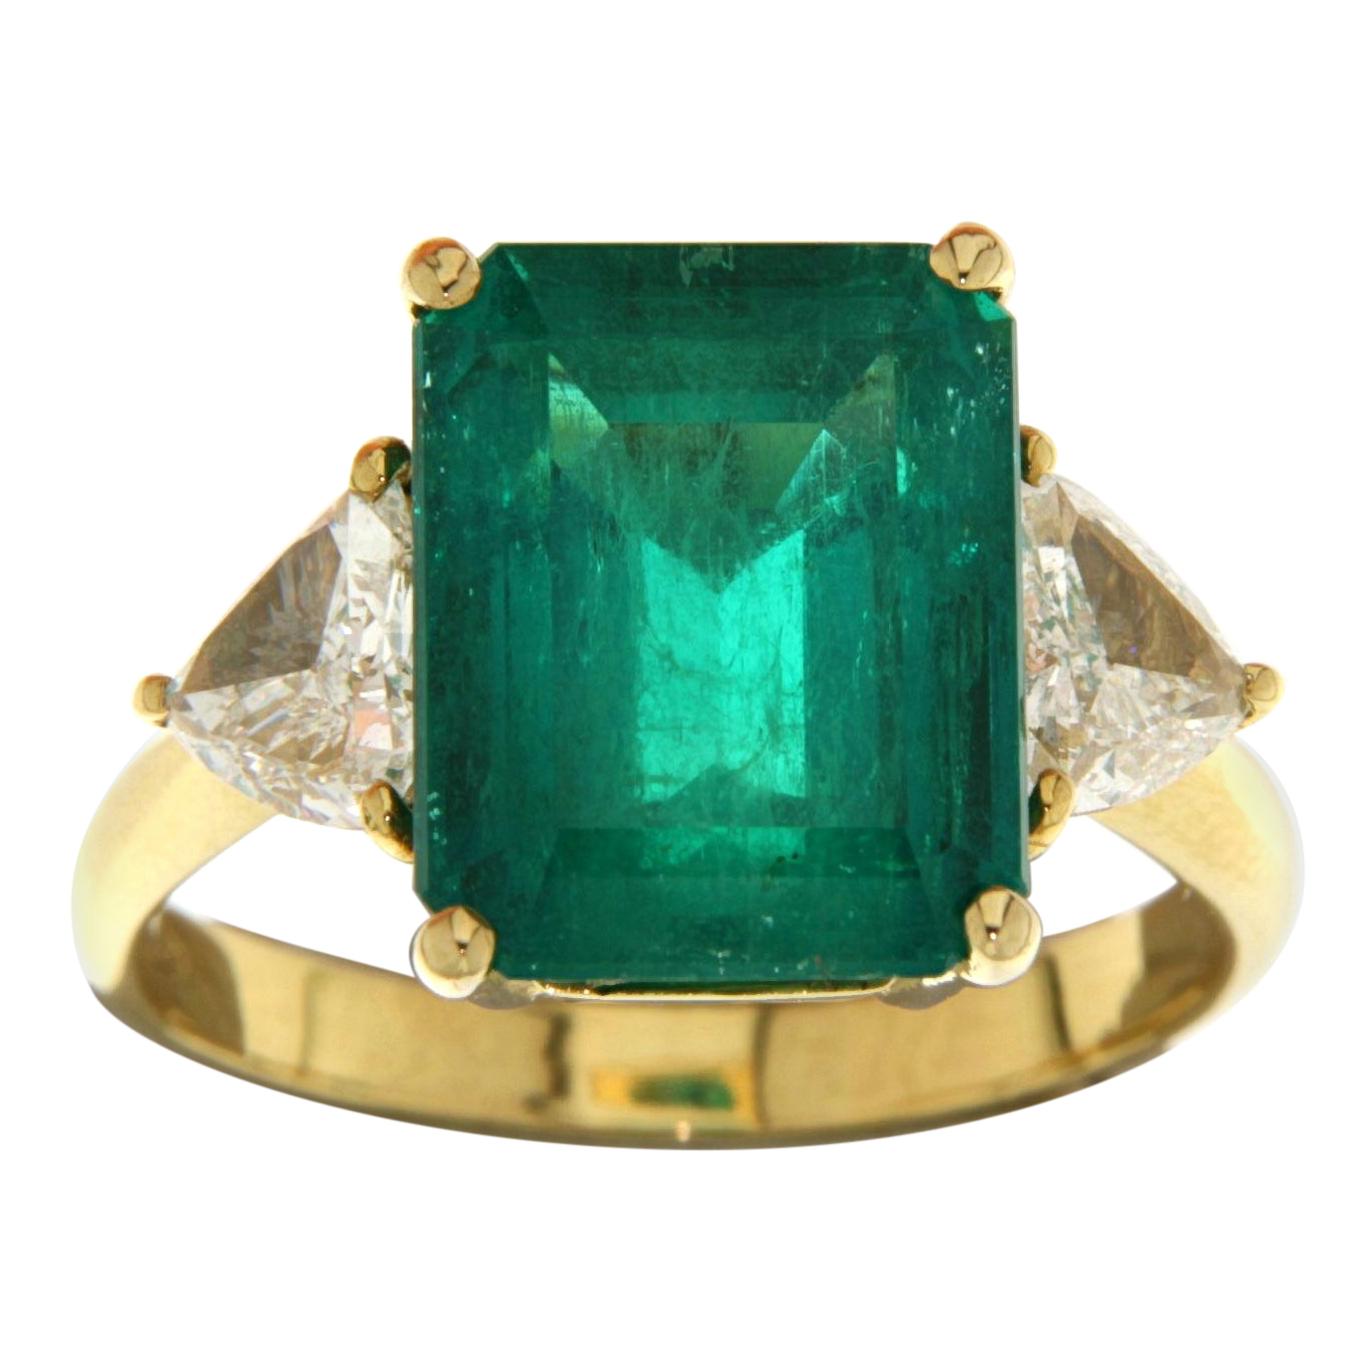 18kt yellow gold Ring 6.75ct Minor Emerald Colombia, Triangle Diamonds,  CGL

Golden ring with large emerald and triangle diamonds.

Emerald: 6.75 ct Colombia,Minor oil, Beryl, Octagonal/ step cut, green emerald stone. Measurements 12.55 x 9.88 x